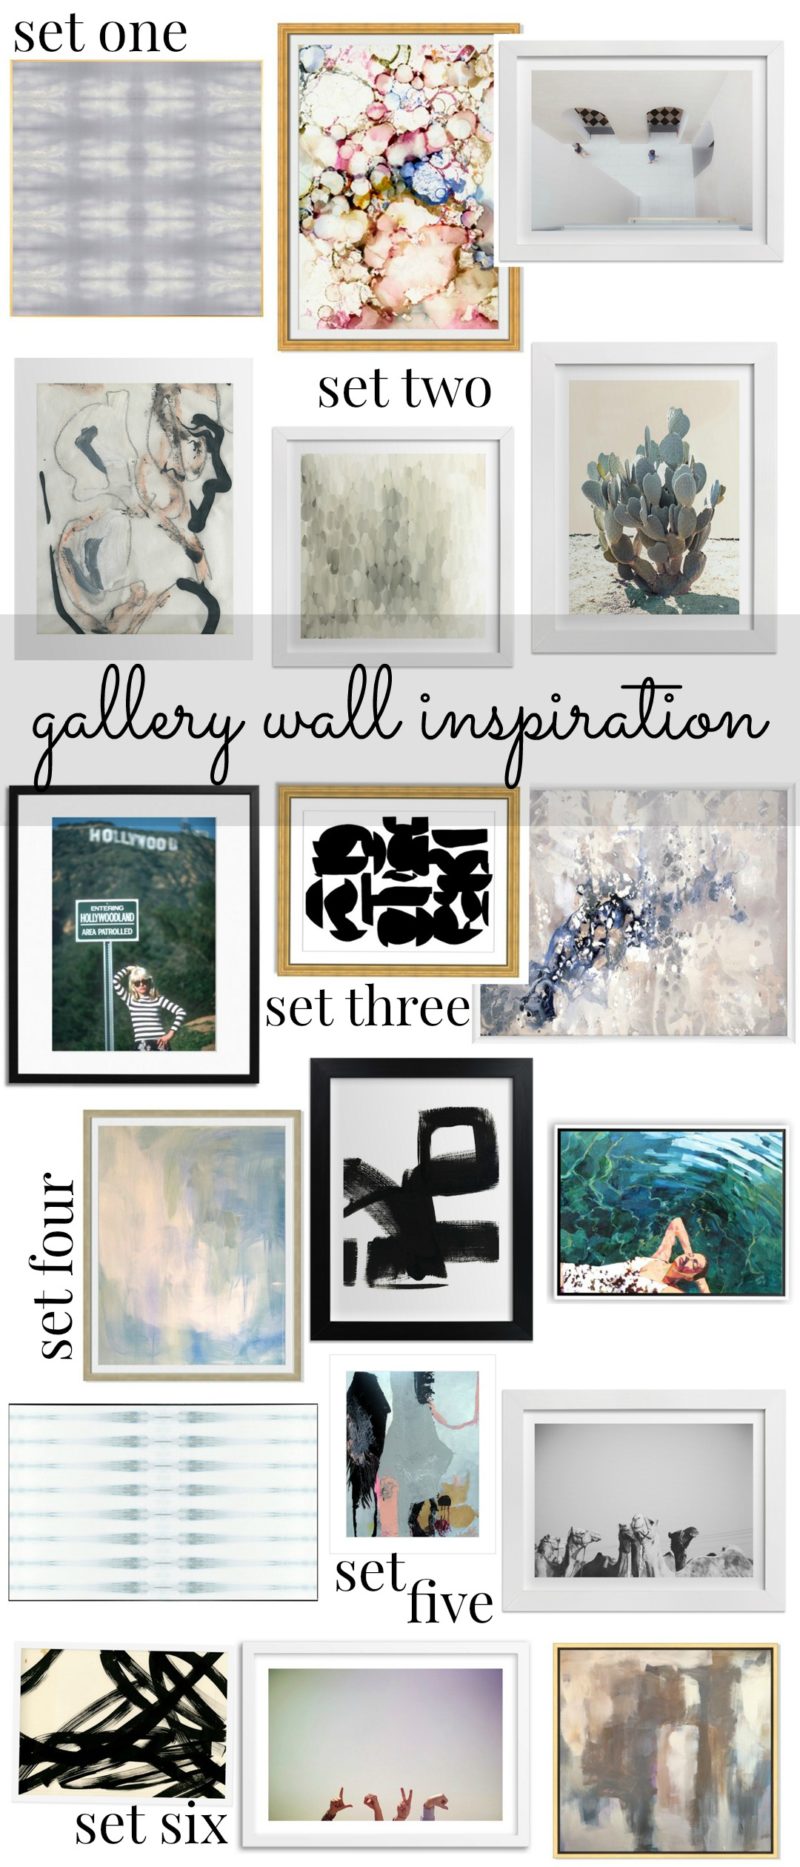 home is where the heart is: gallery wall inspiration - Glitter & Gingham